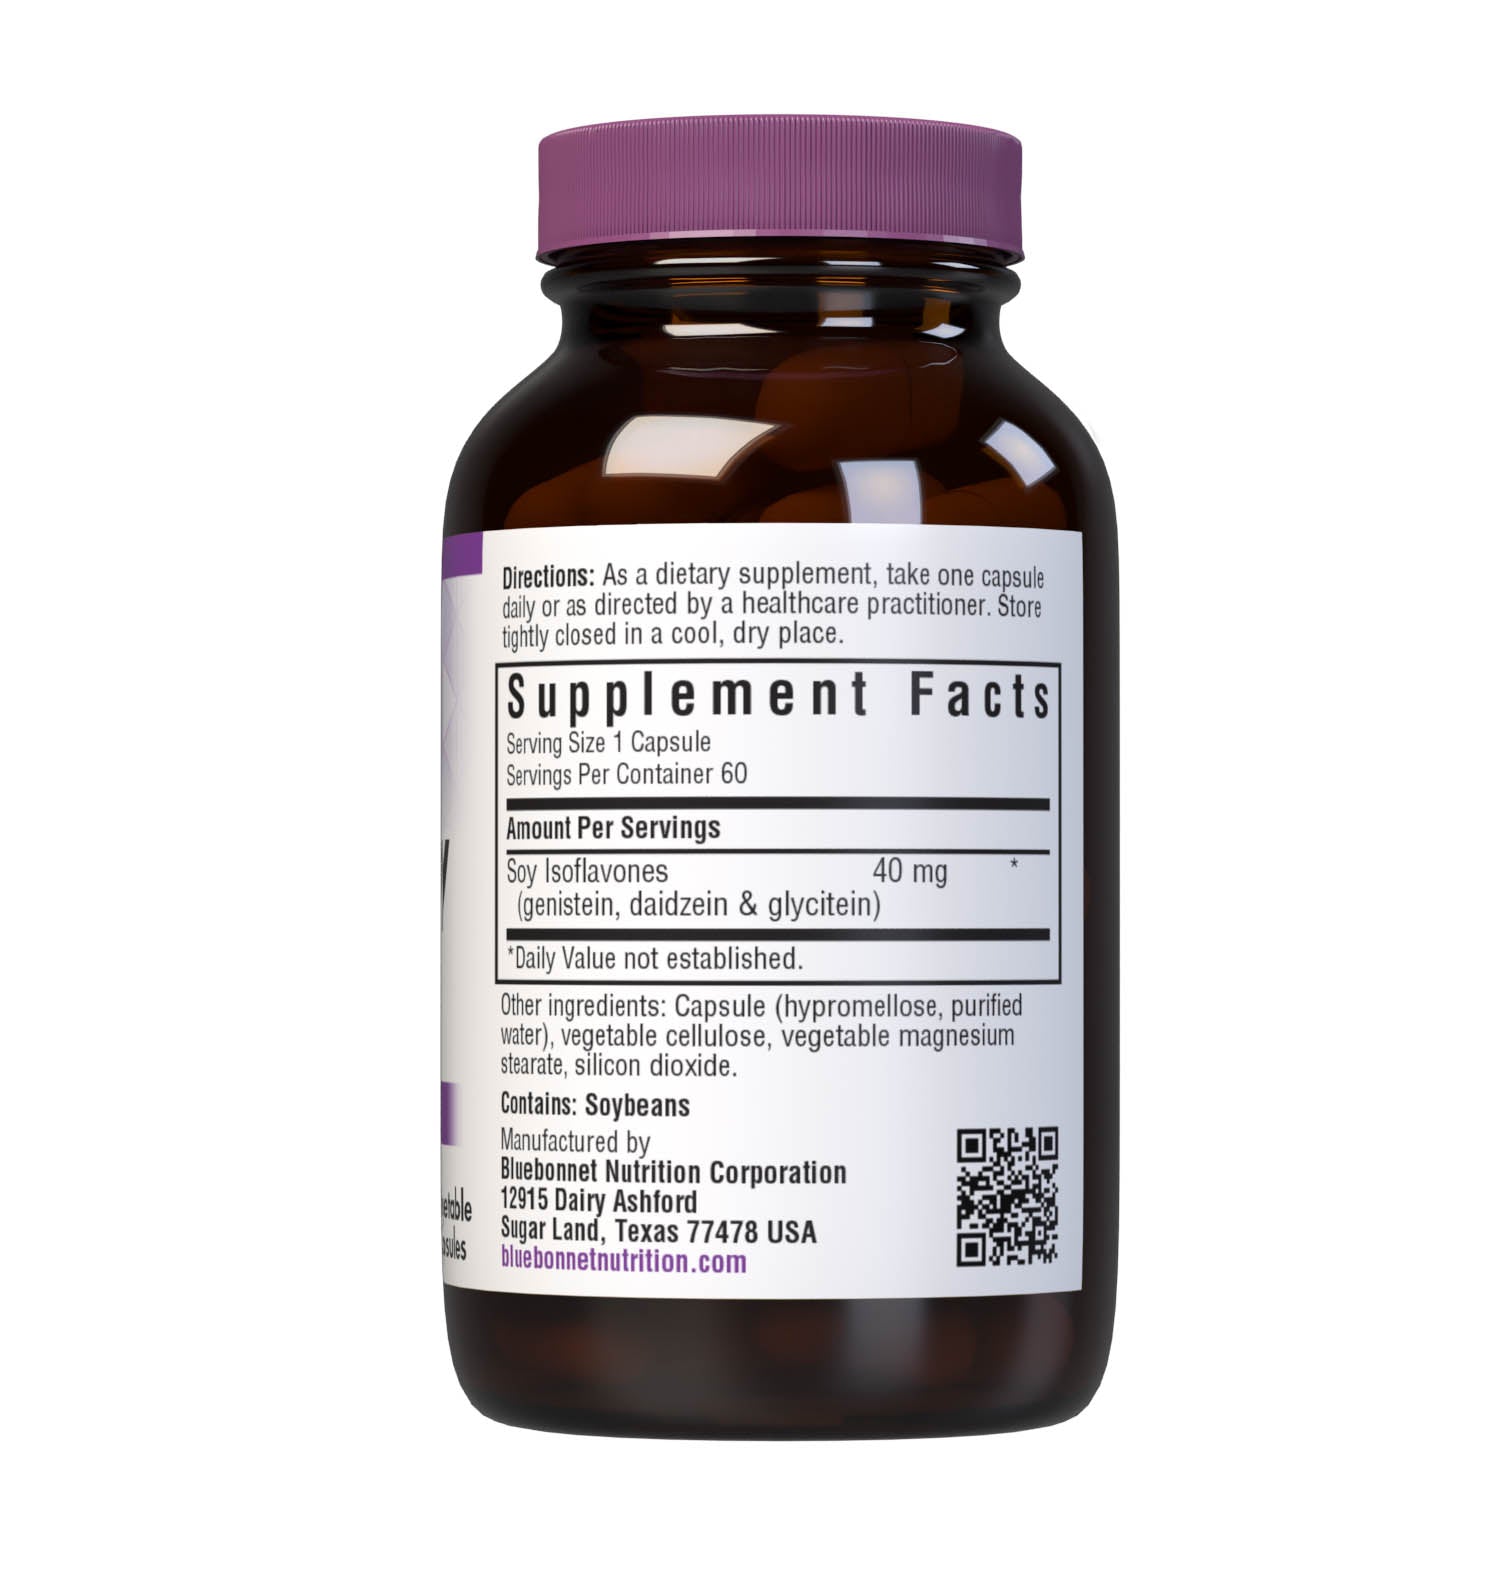 Bluebonnet’s Non-GMO Soy Isoflavones 60 Vegetable capsules contain isoflavones from non-GMO soybeans. This unique phytoestrogen formula supplies a concentrated source of genistein, daidzein and glycitein. Supplement facts panel. #size_60 count